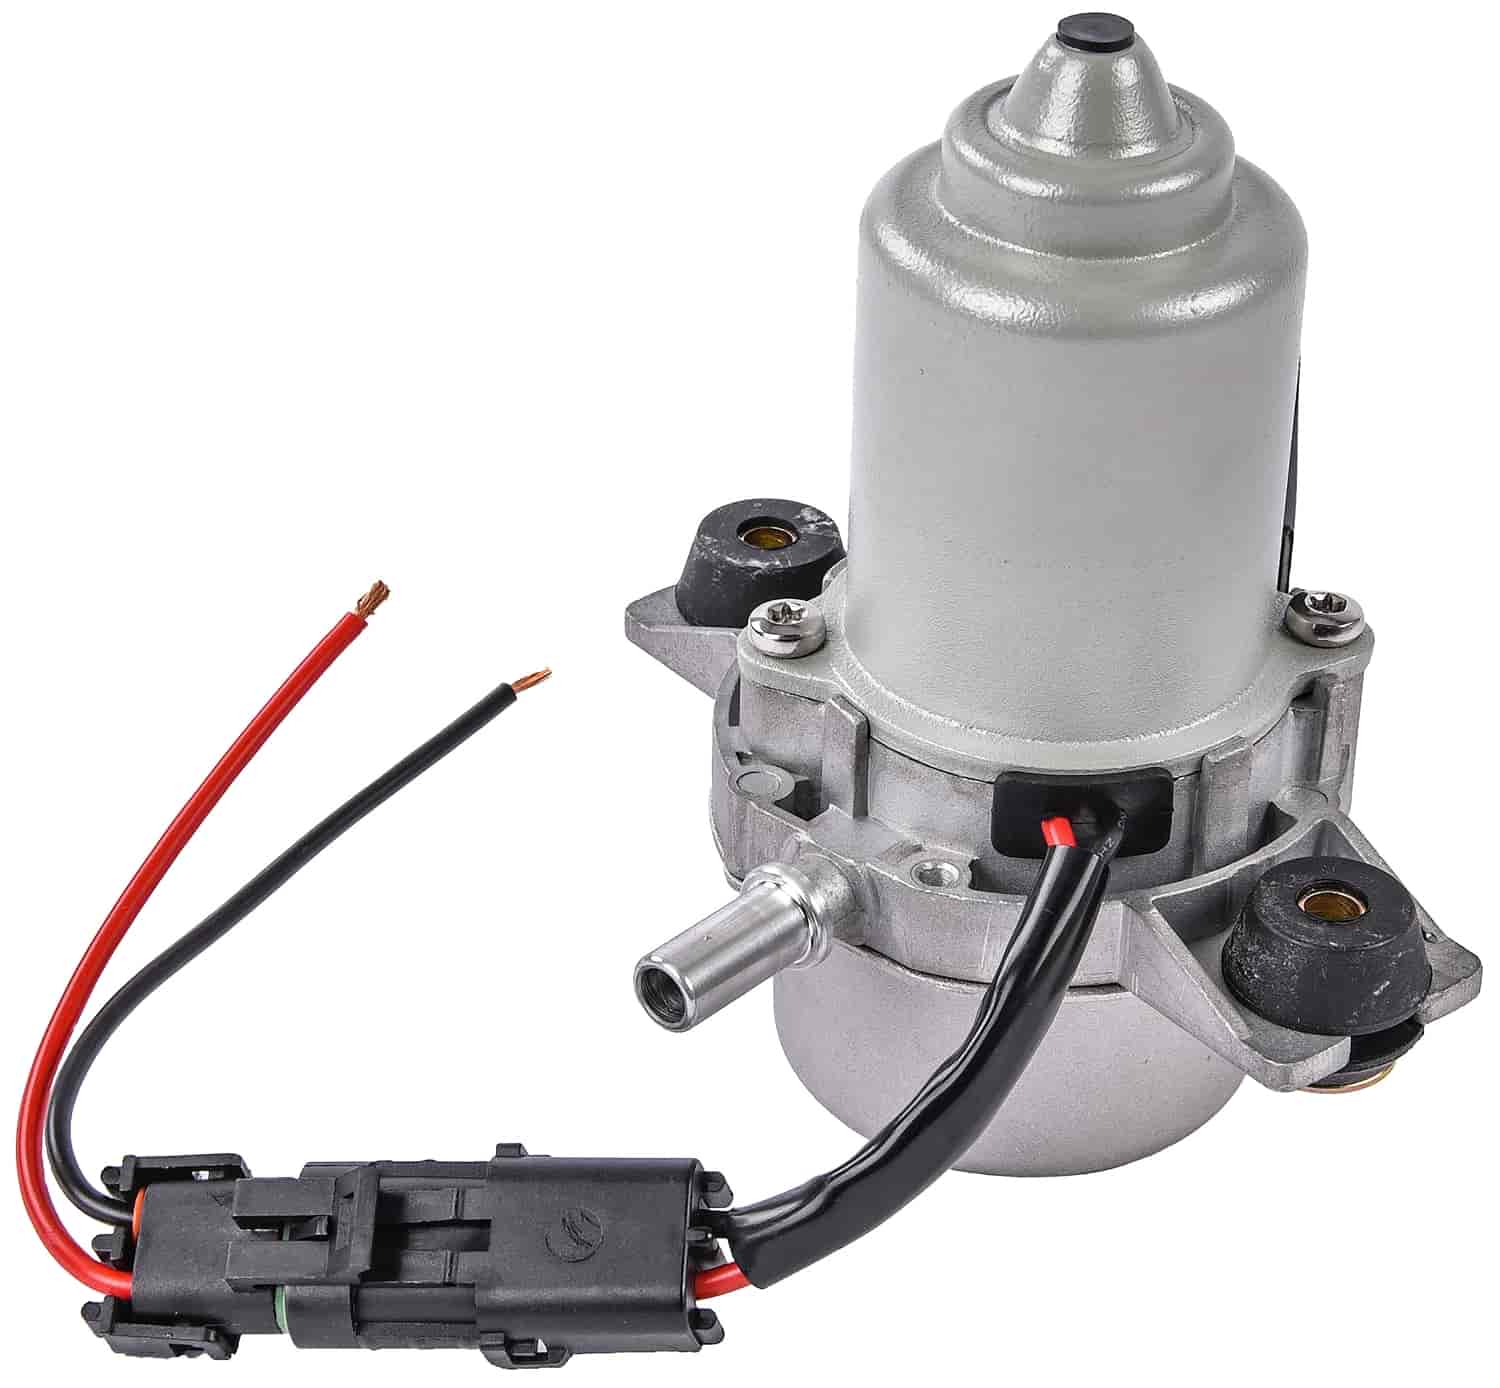 Electric Vacuum Pump Best Suited for Controlling Vacuum Accessories such as Headlight and HVAC Actuators, Wipers and More